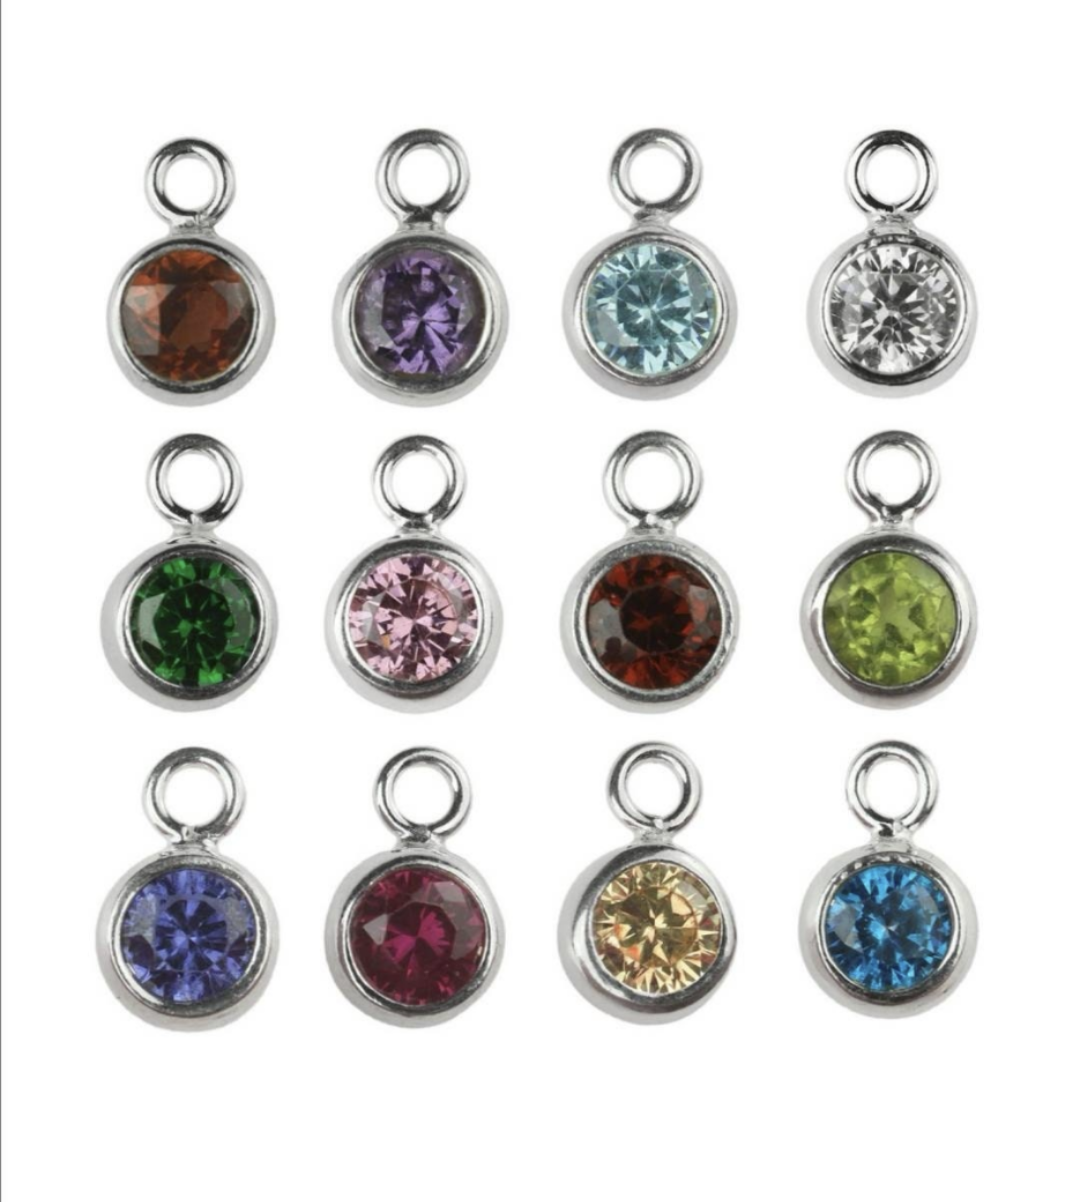 Birthstone Necklace - With Love Jewellery UK